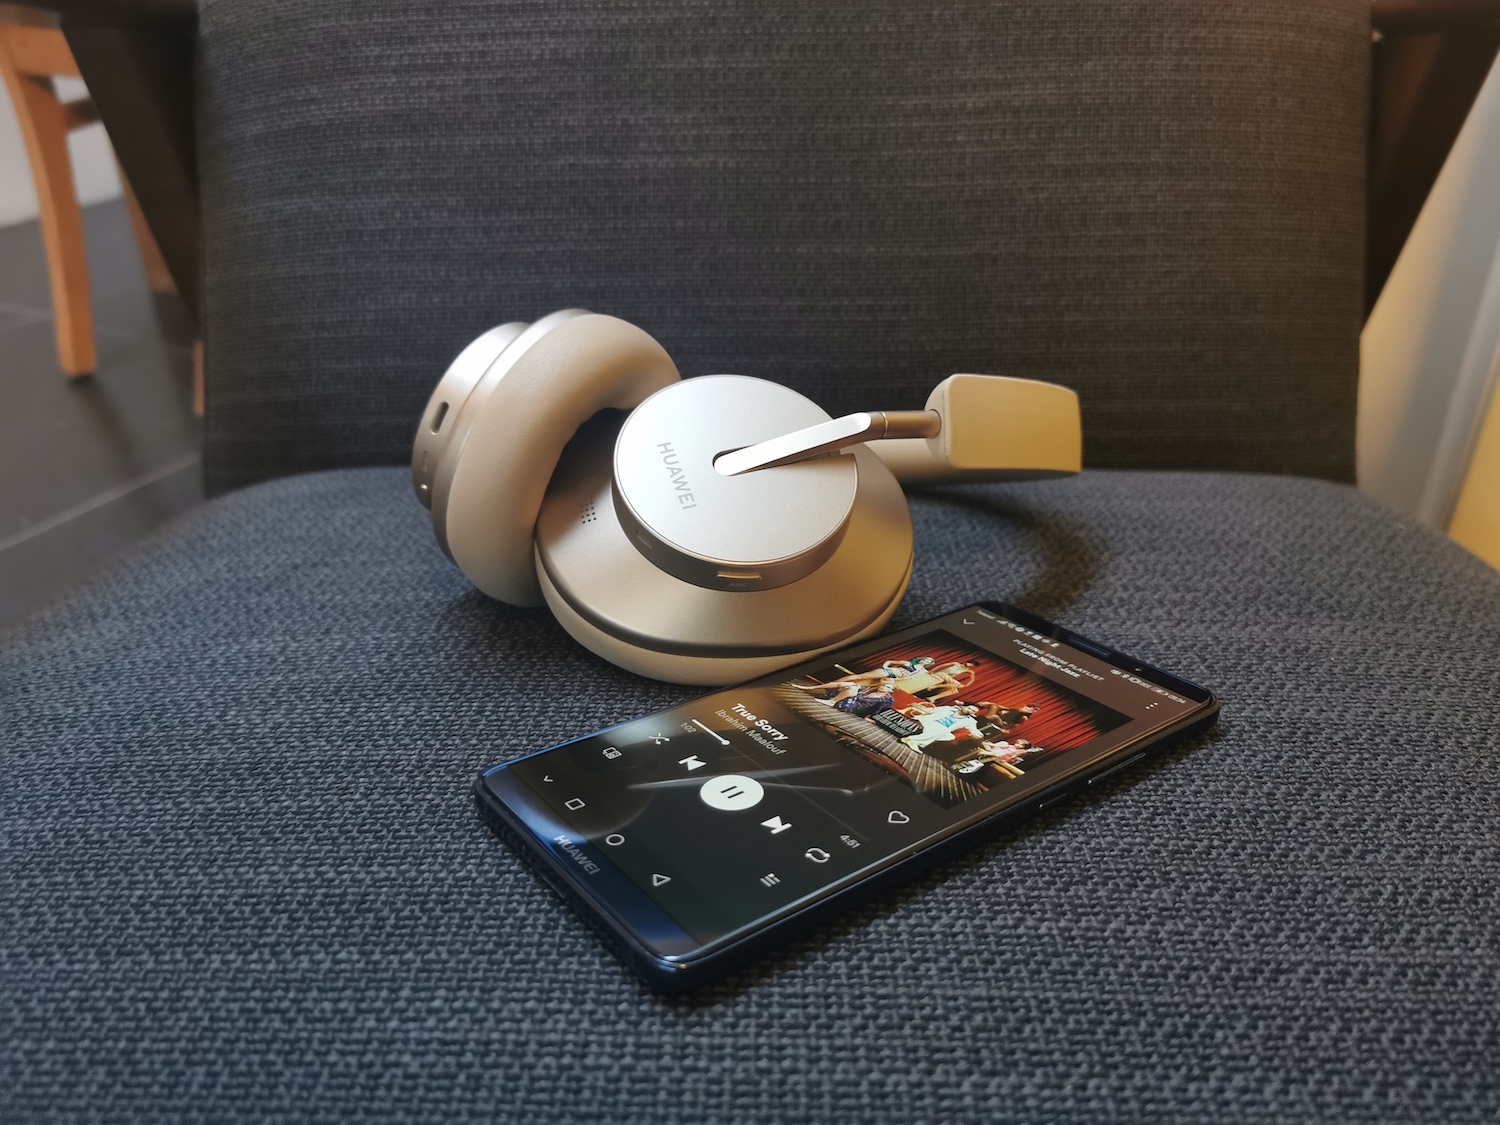 review:-huawei-freebuds-studio-elegant-and-good-headphones-with-noise-cancellation